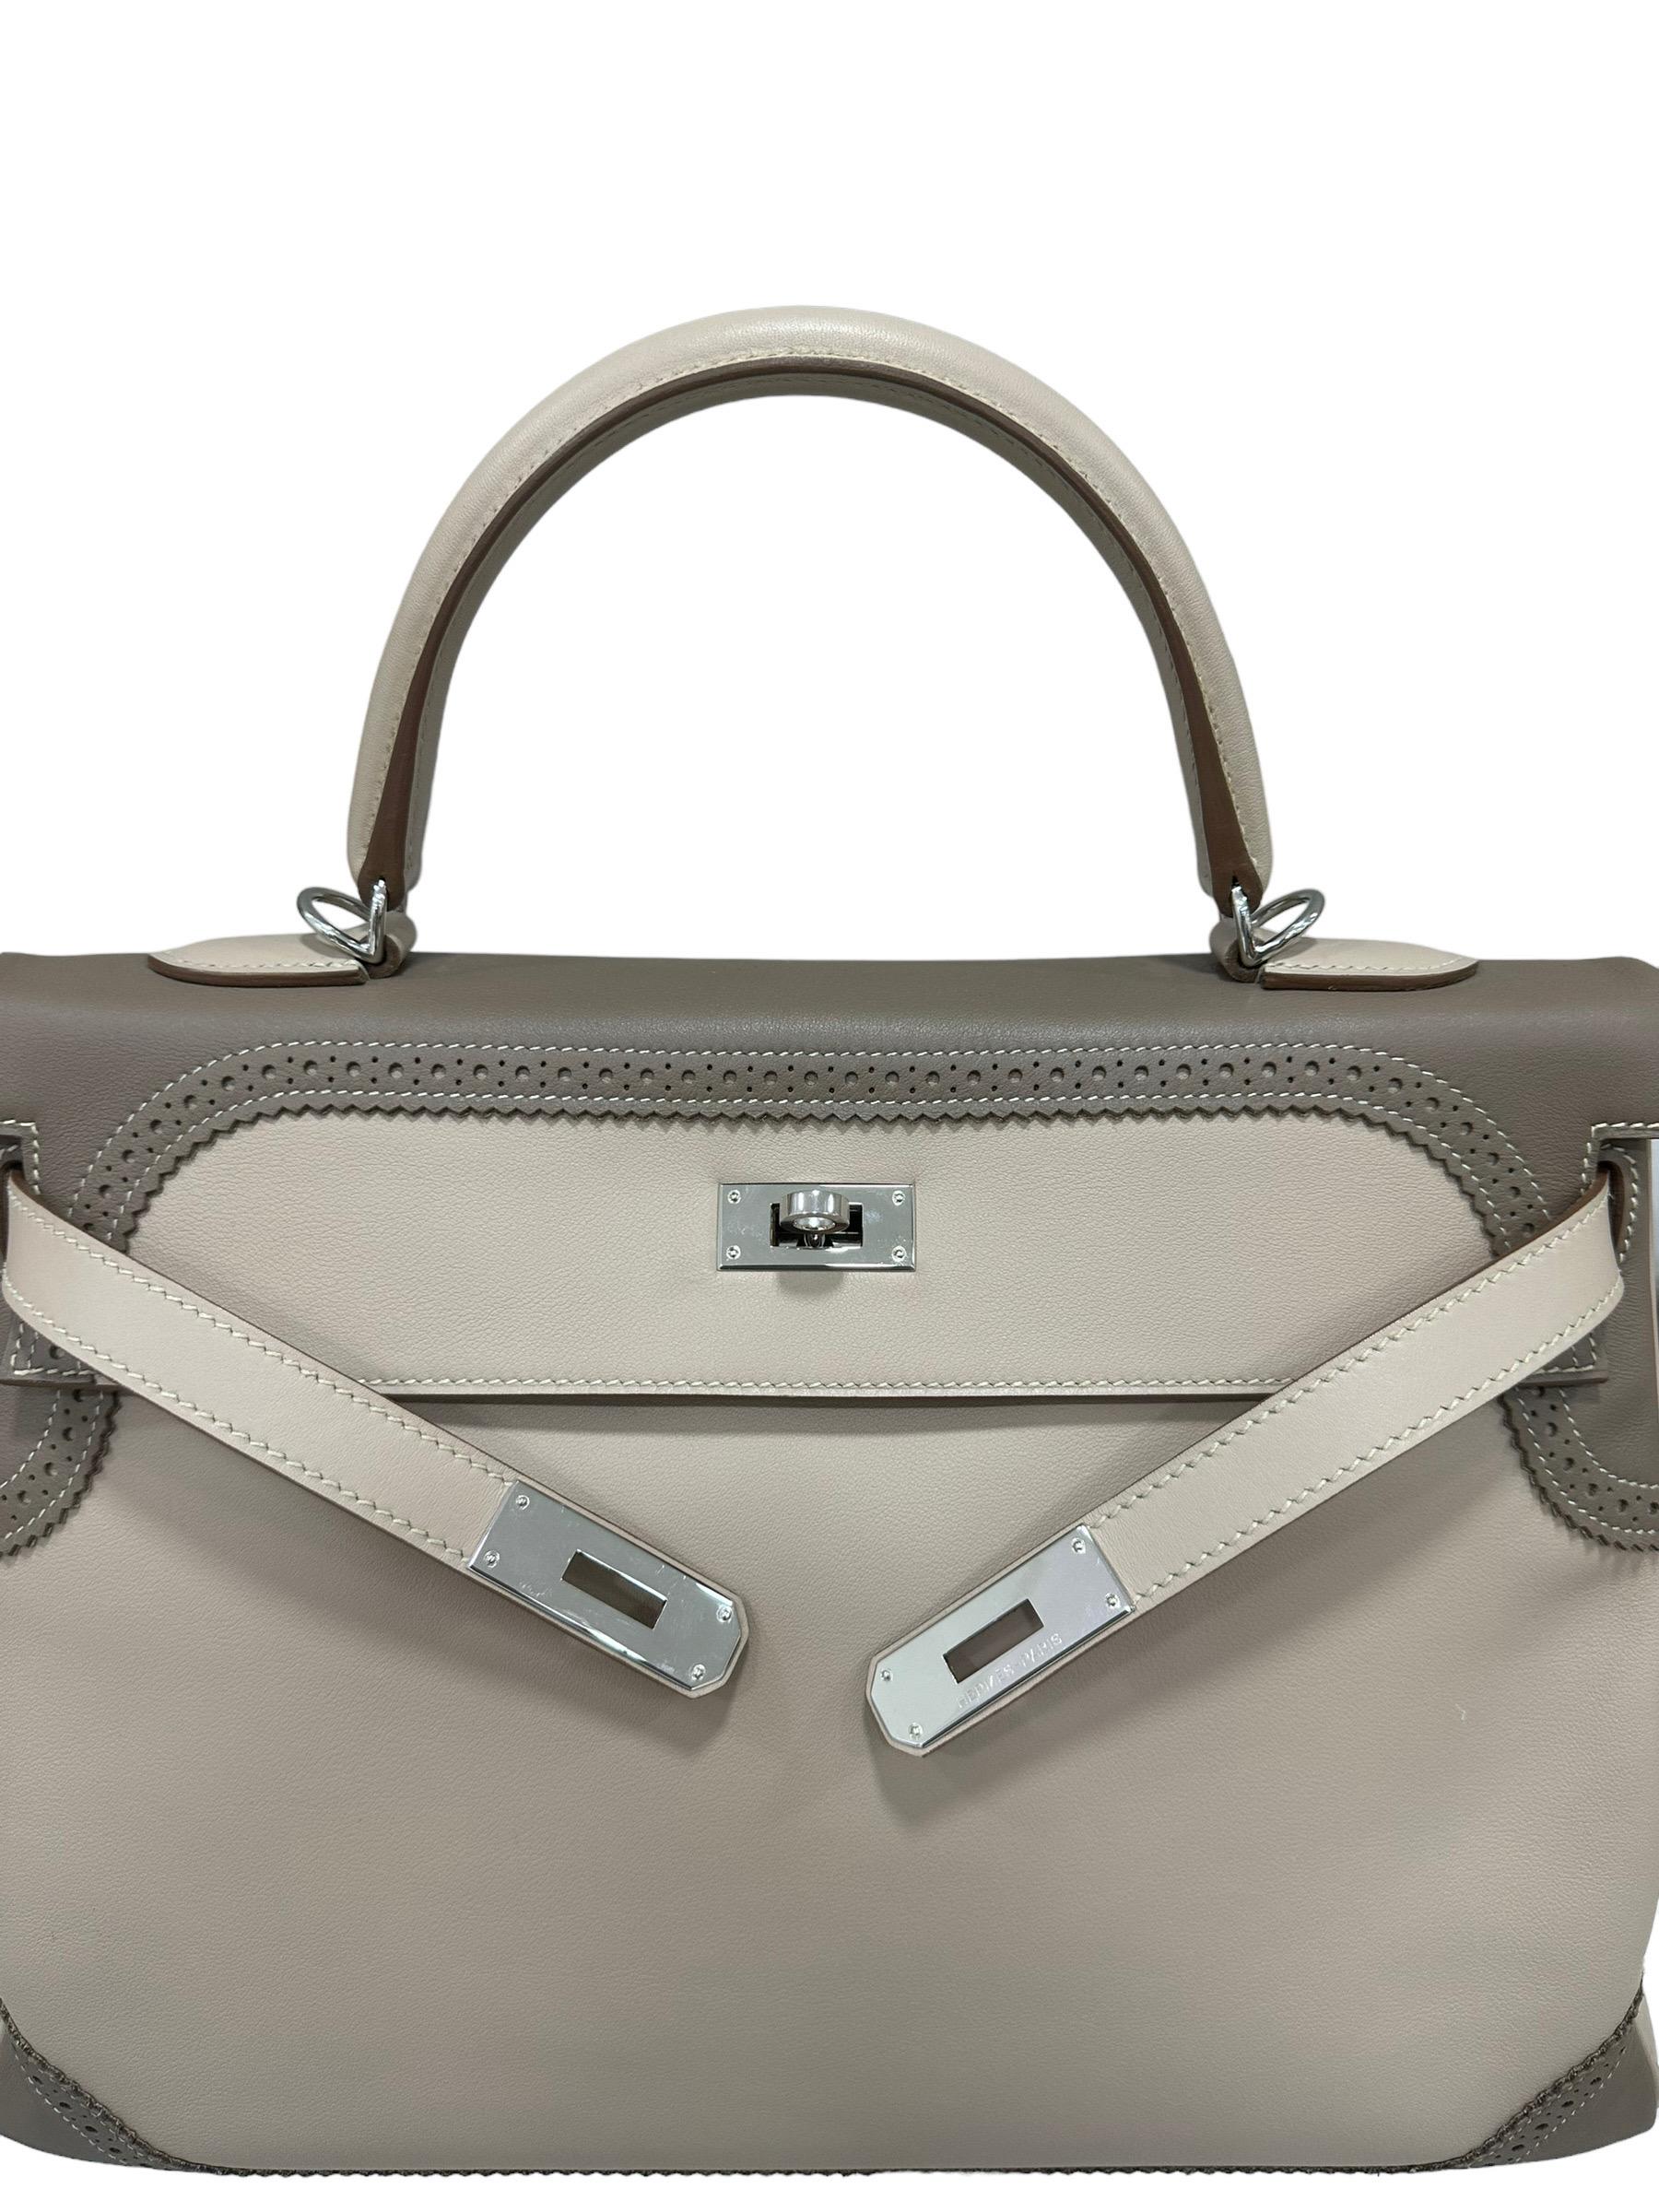 2012 Hermès Kelly 35 Ghillies Evercalf Craie/Taupe For Sale 5